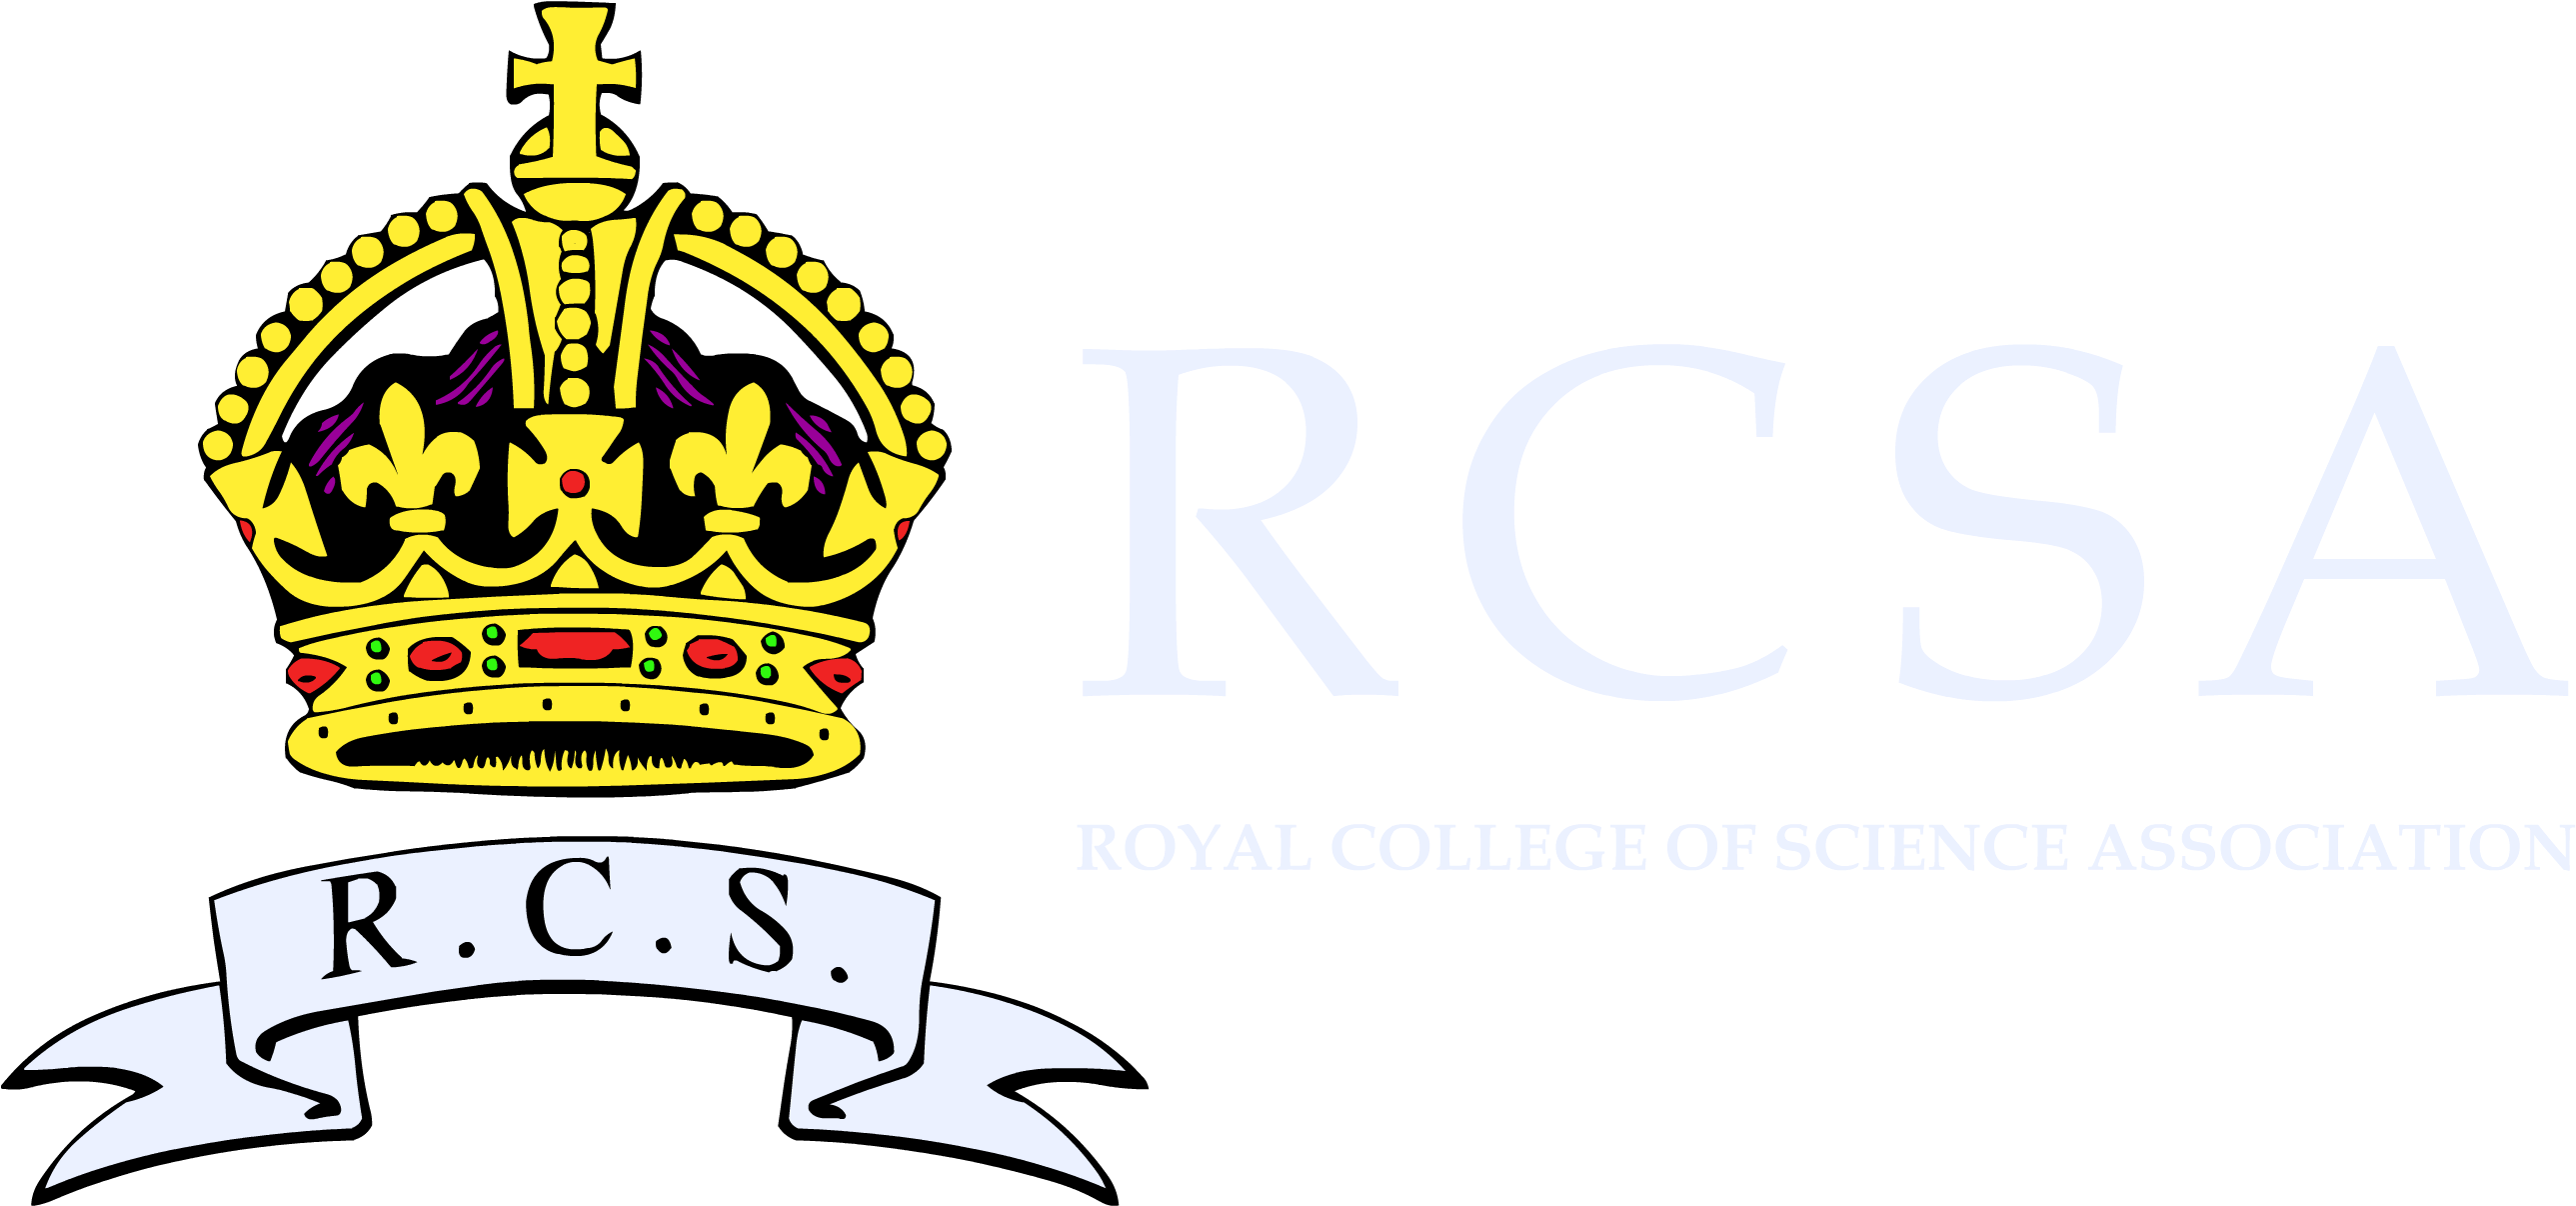 Royal College Of Science Association - Royal College Of Science Union (2700x1250)